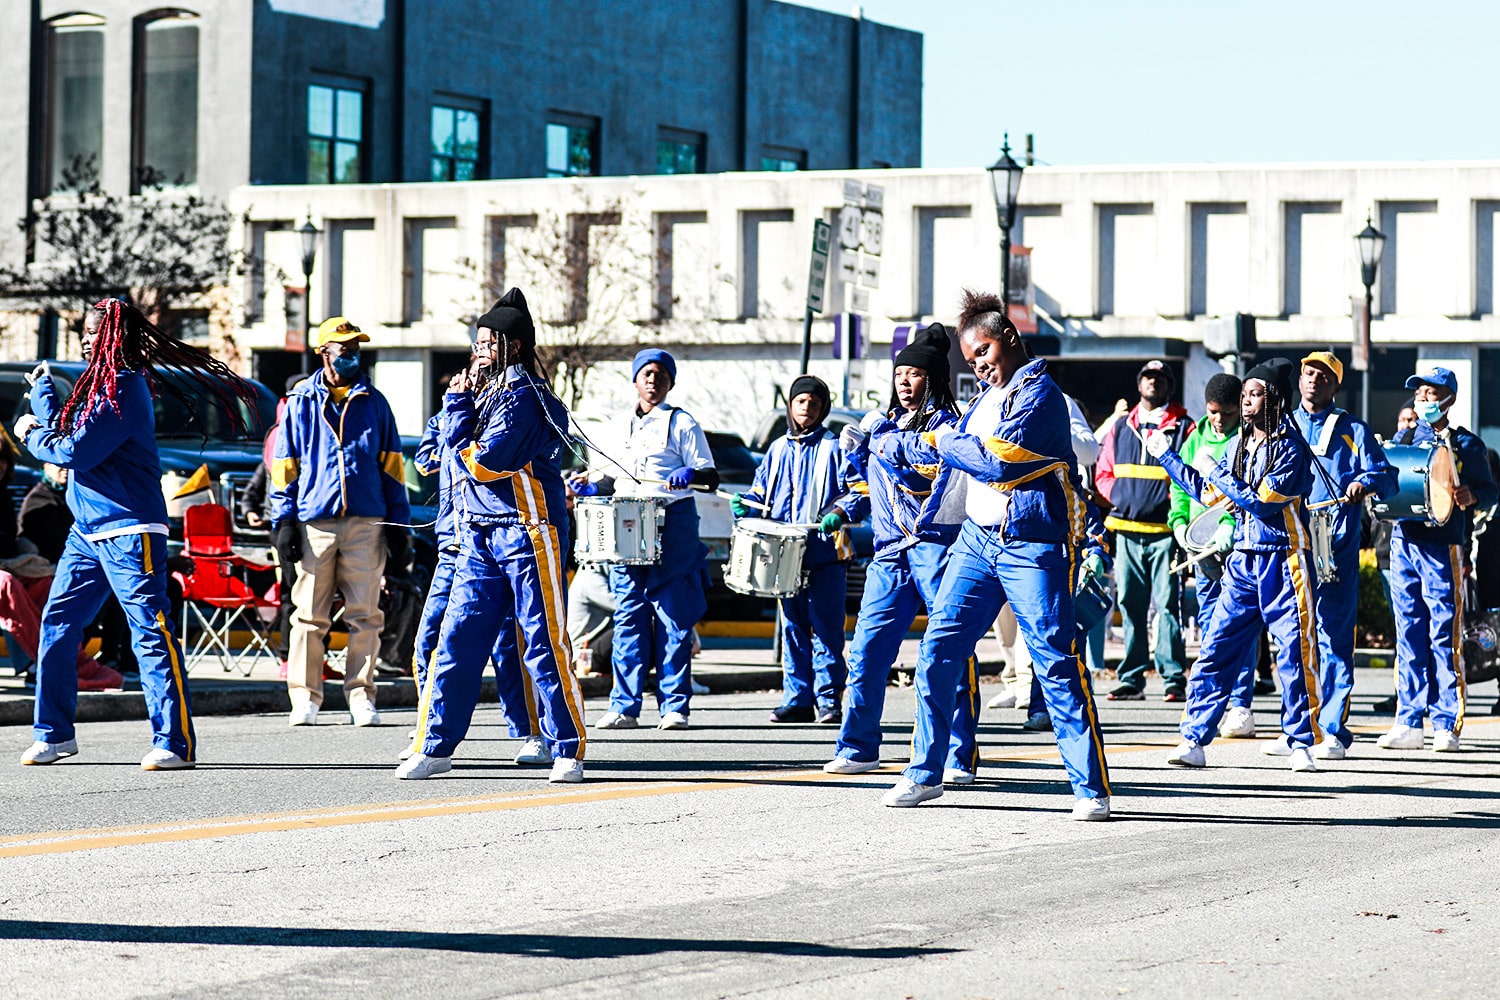 Young Blacks in Action Community Band and Dancettes Inc. Orlando, Fl. Established 1979 Performing in todays MLK Parade. Photo by Cheryl Clanton